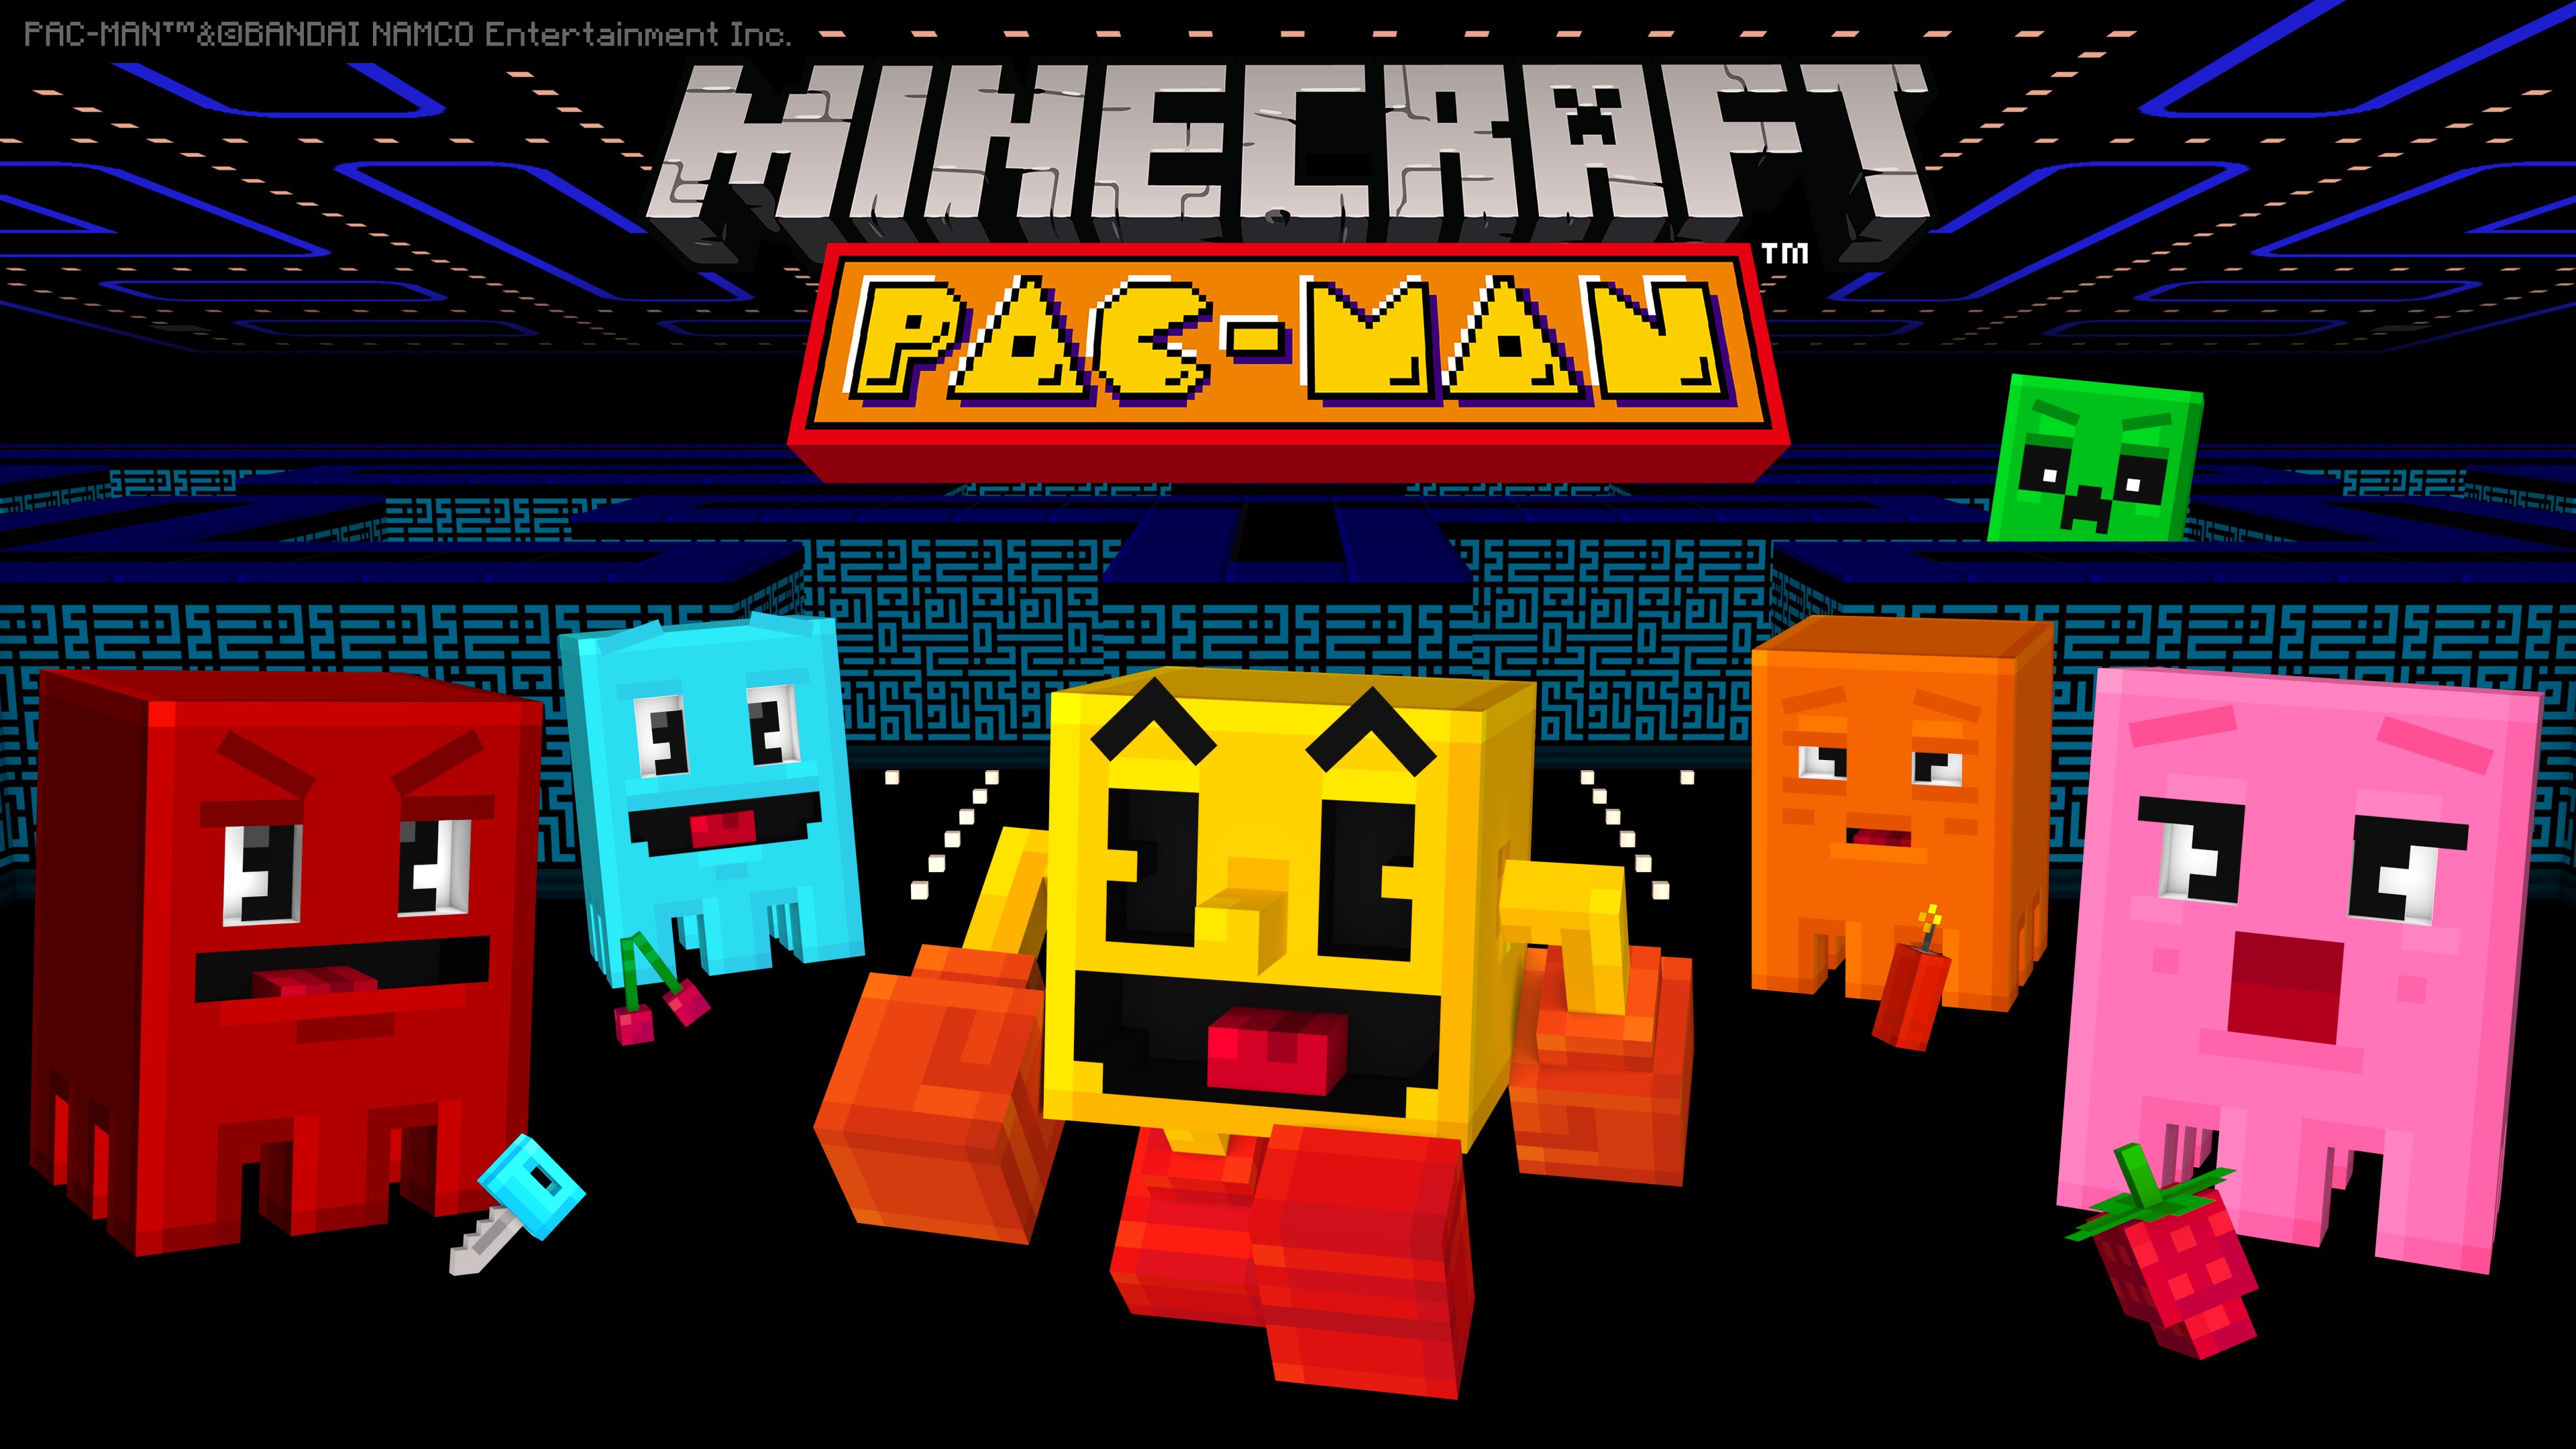 pacman for xbox